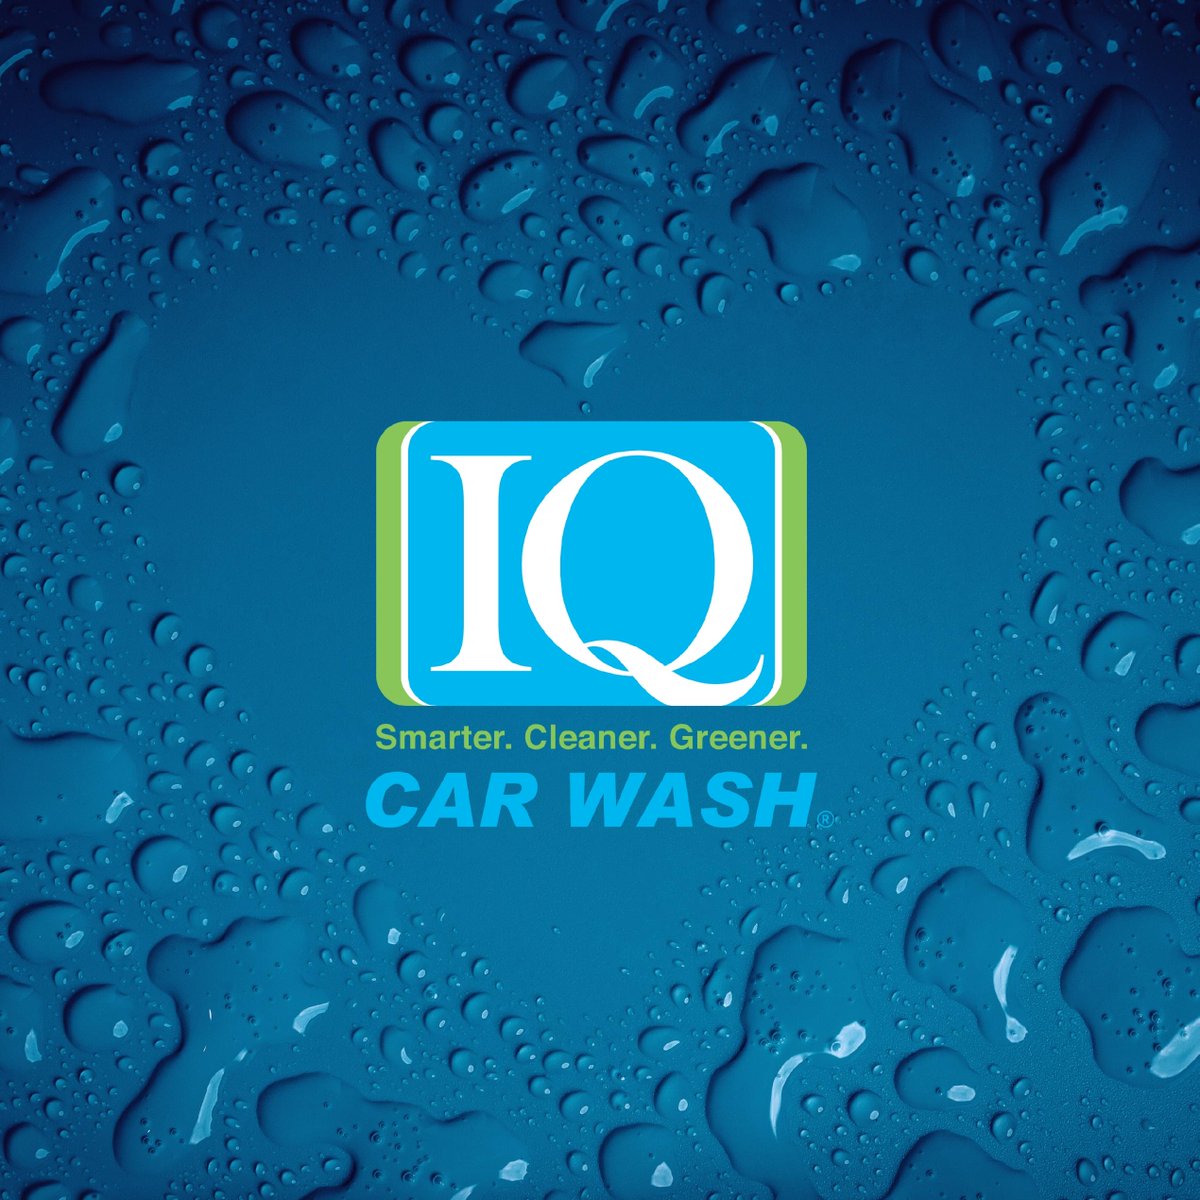 There's so much to love about IQ Car Wash. Among those things is our commitment to our customer's experience every time they choose to wash with us!📍17477 Manderson St, Omaha, NE 68116

#customersatisfaction #locallyowned #omahacarwash